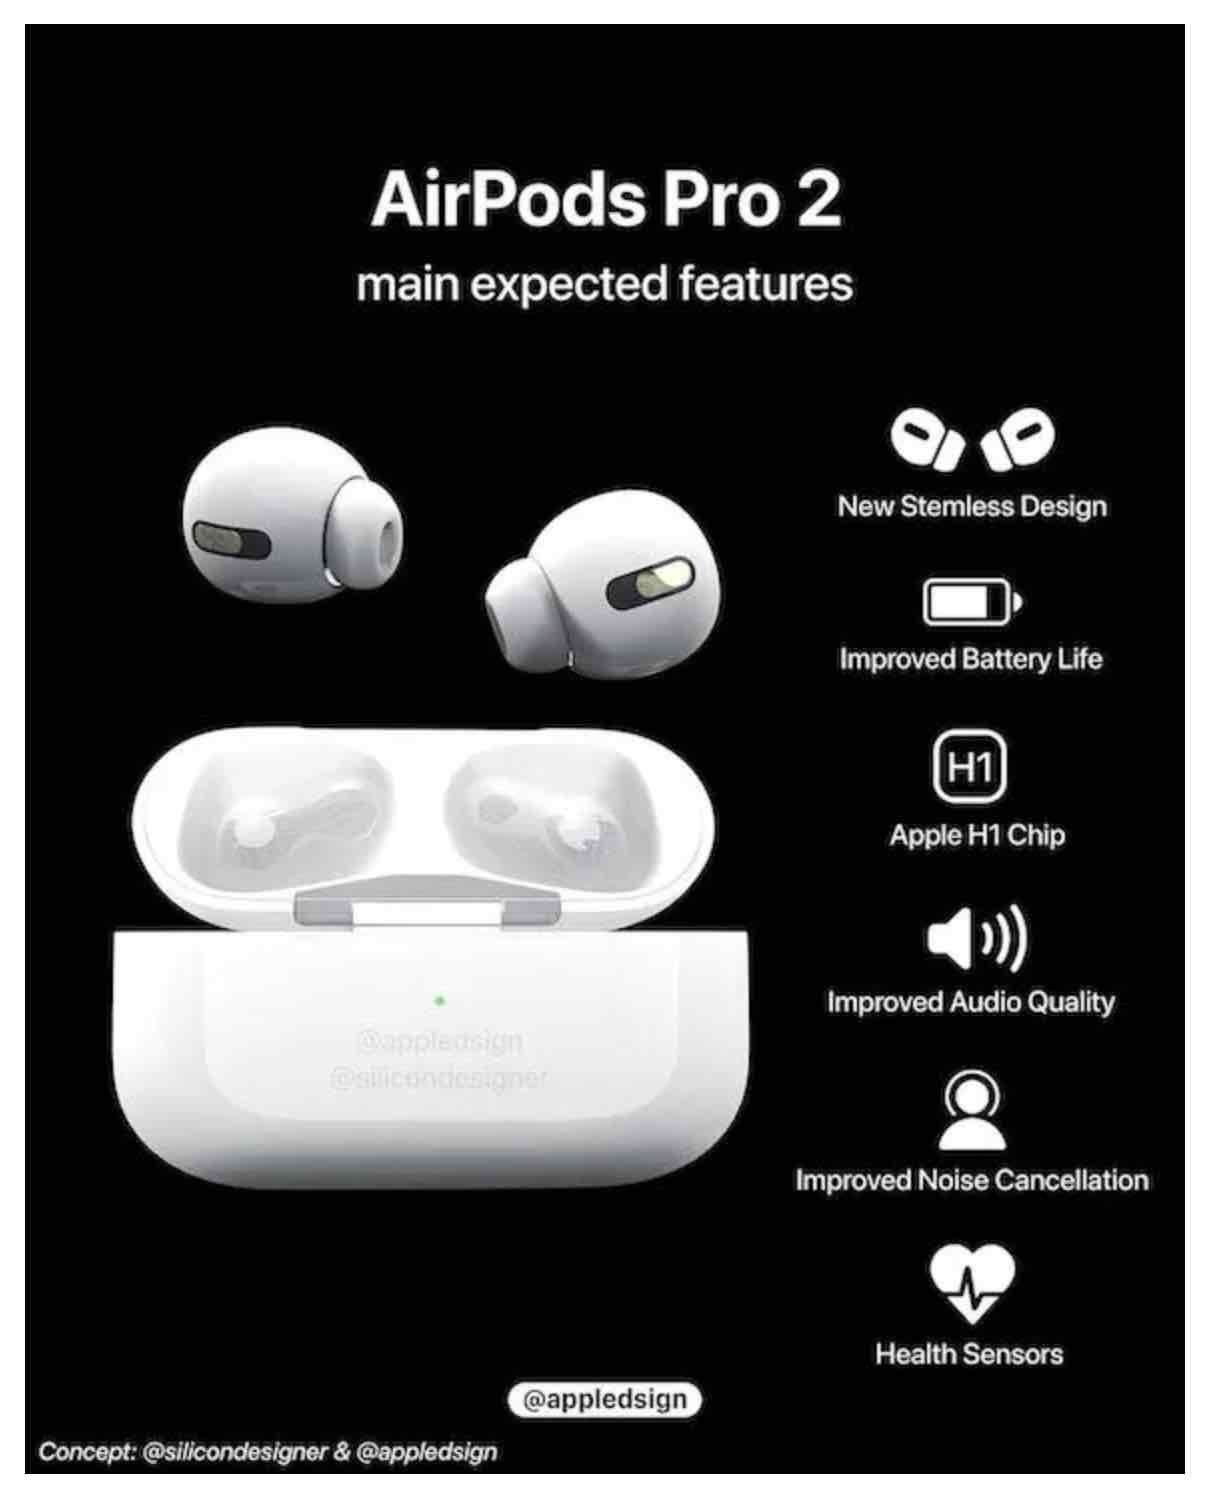 AirPodsPro2